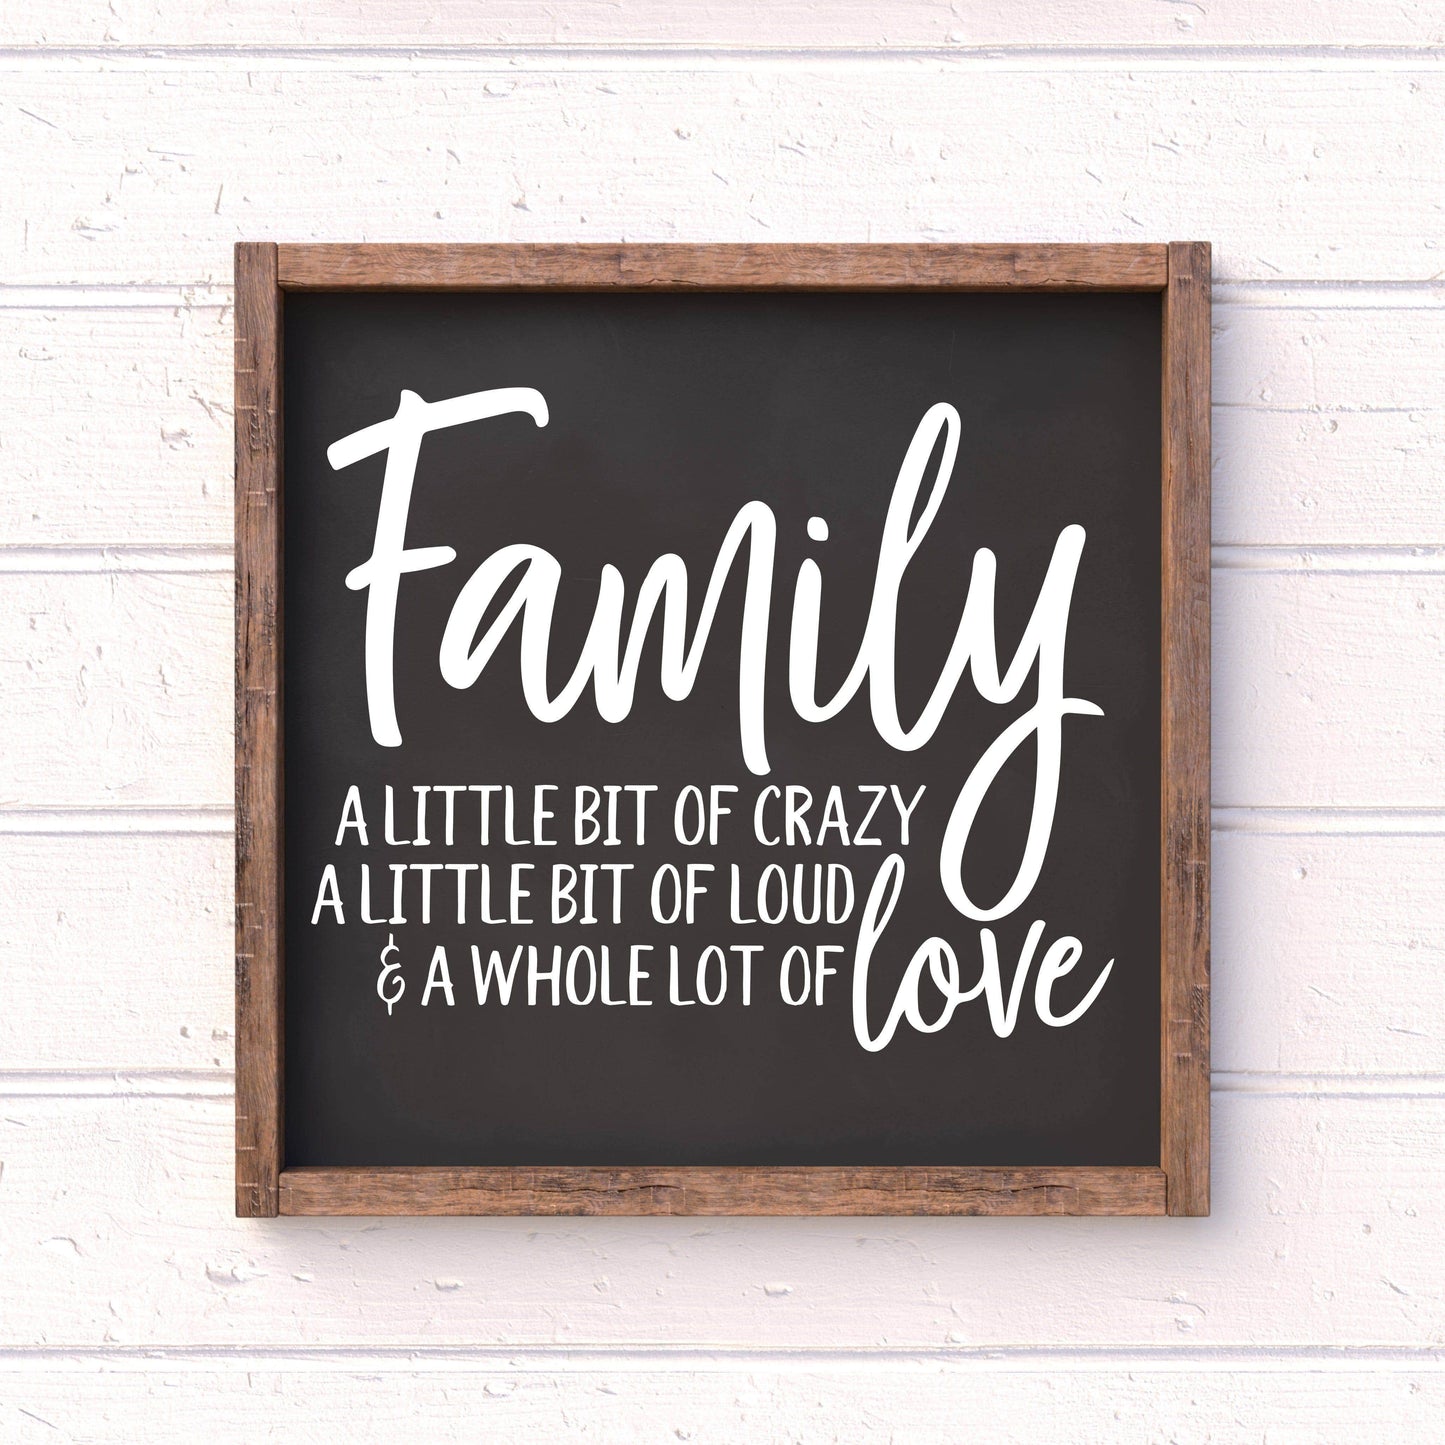 Family, a lit bit of Everything framed wood sign, farmhouse sign, rustic decor, home decor